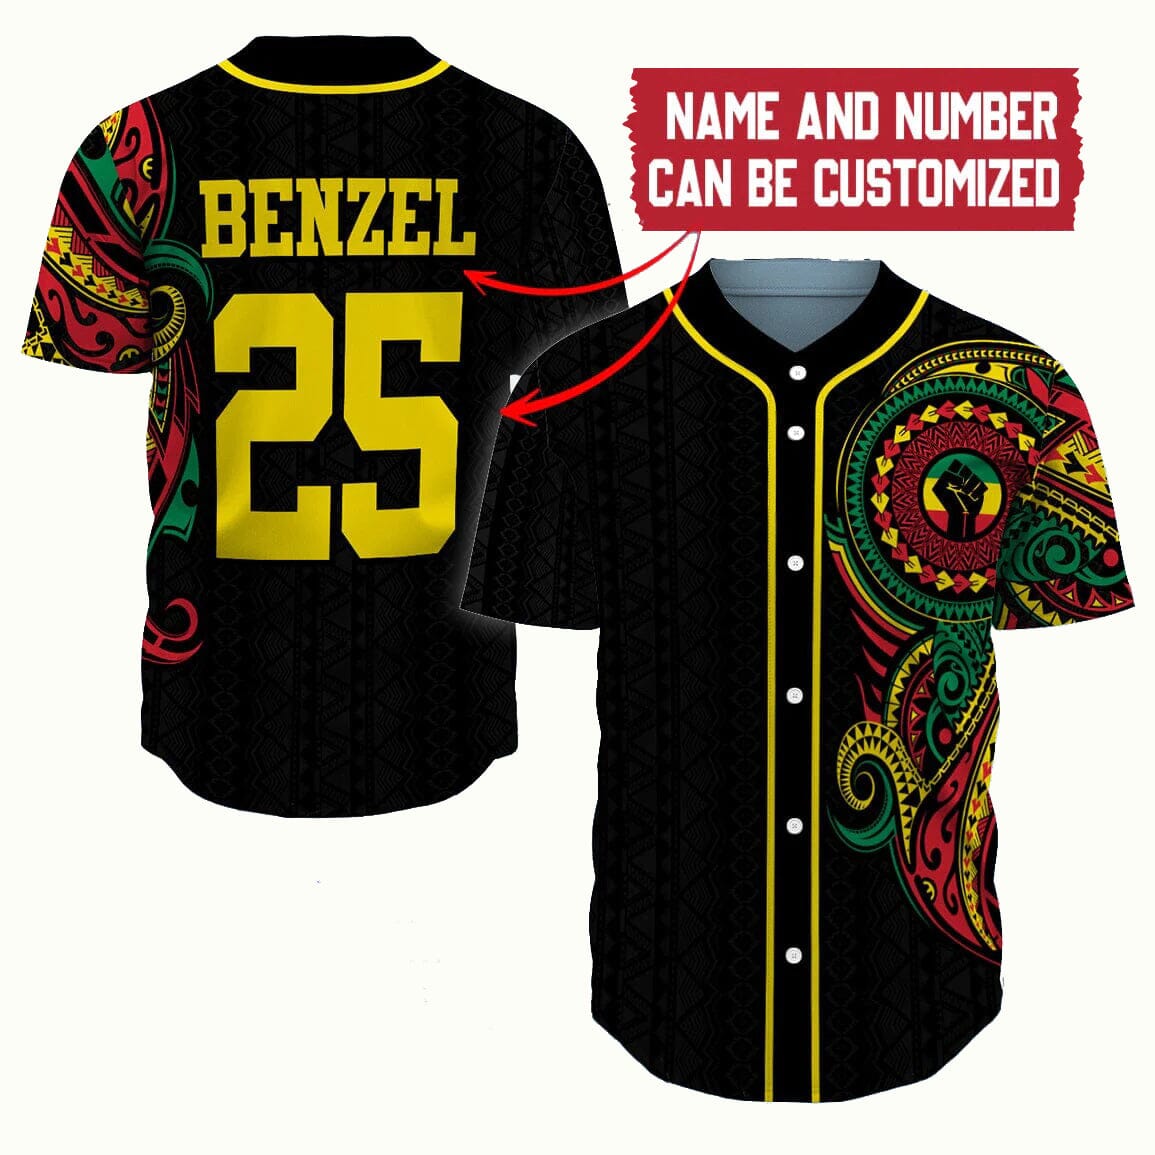 African Soul, Juneteenth V2 - Personalized Baseball Tee Jersey